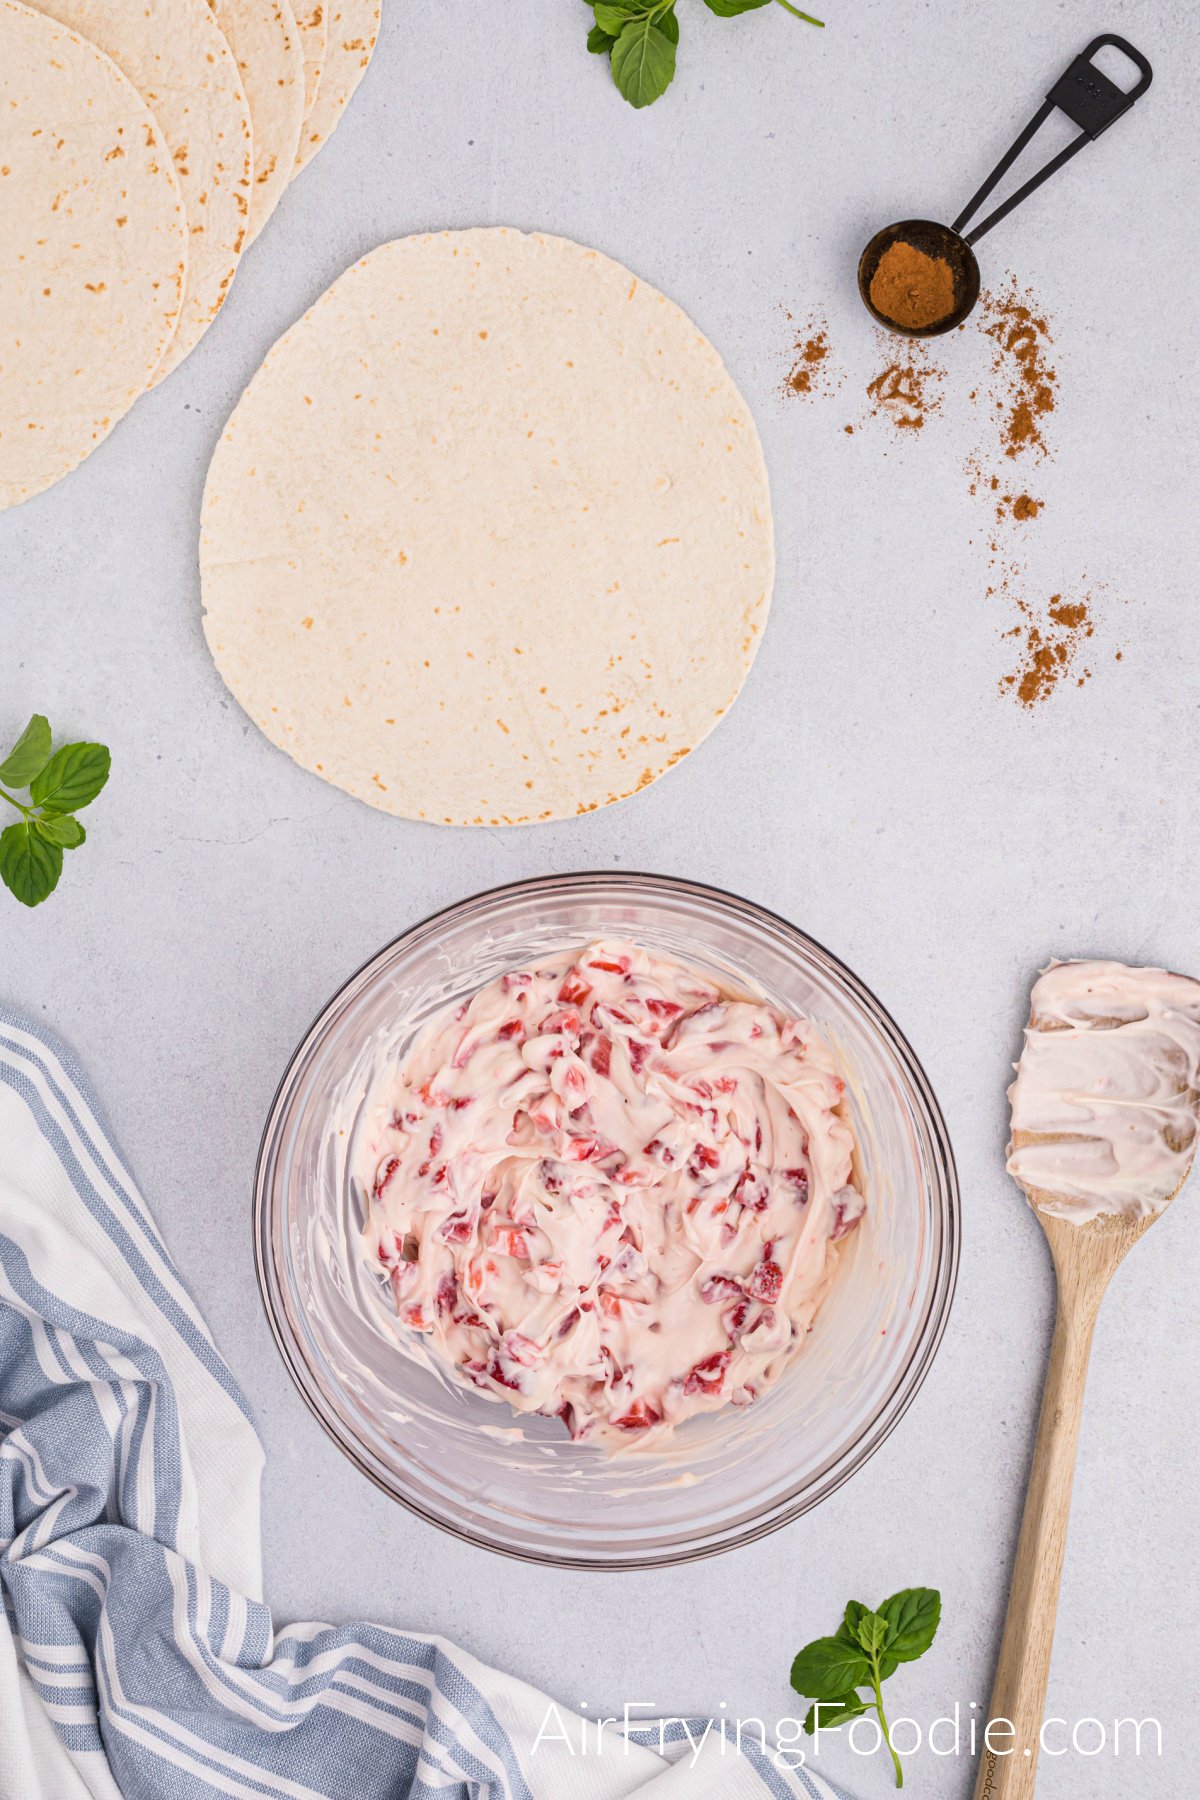 A glass bowl with the strawberries folded into the cream cheese and marshmallow mixture. There is a wooden spoon to the bowl's right with some mixtures on it. Above the bowl are tortillas and a measuring spoon of cinnamon.